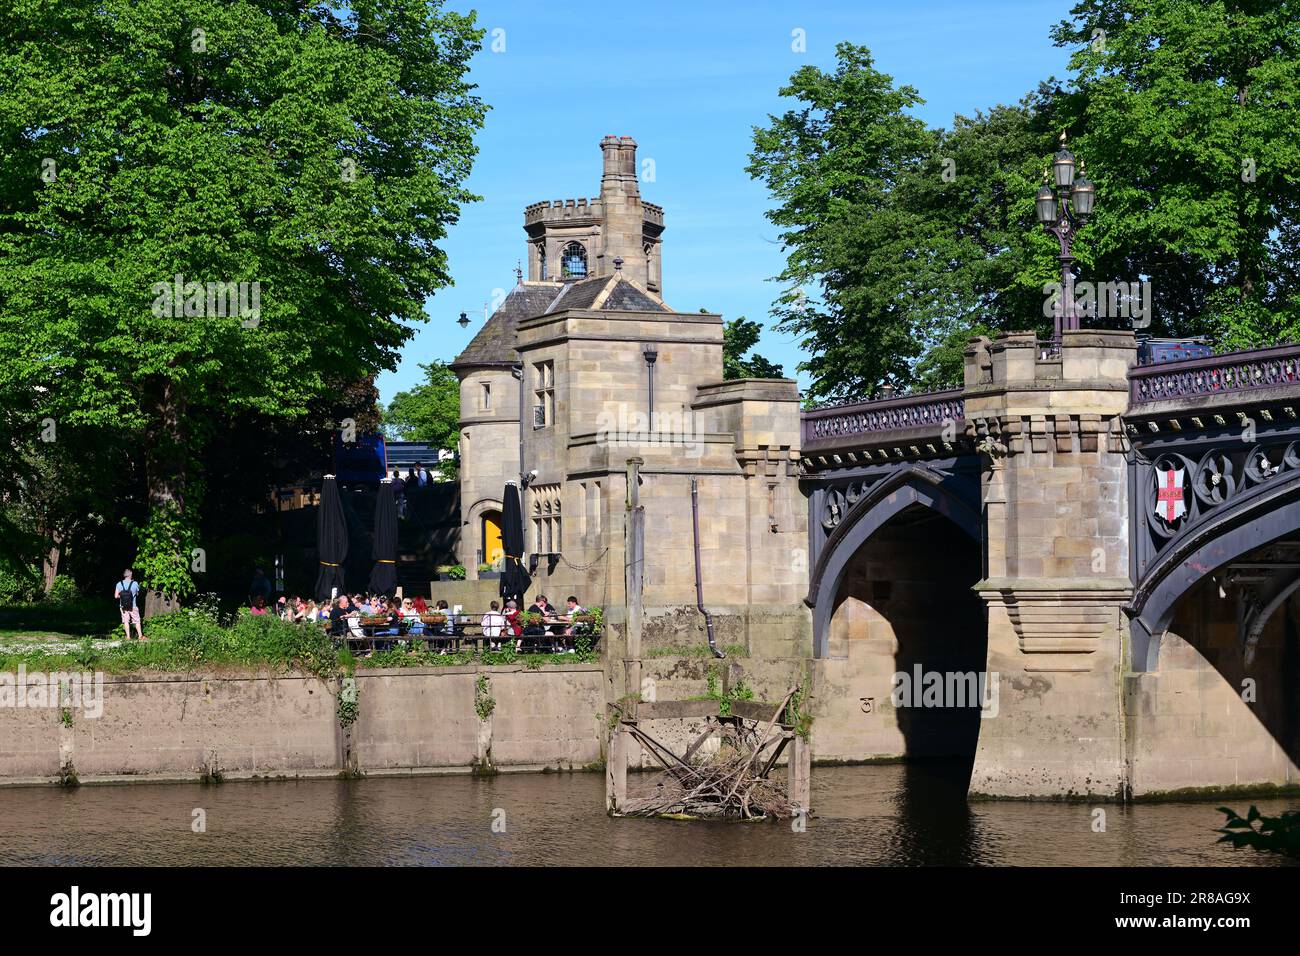 skeldergate bridge and toll house built in 1878 by Thomas Page completed by his son George Page crossing the river Ouse York Yorkshire UK Stock Photo